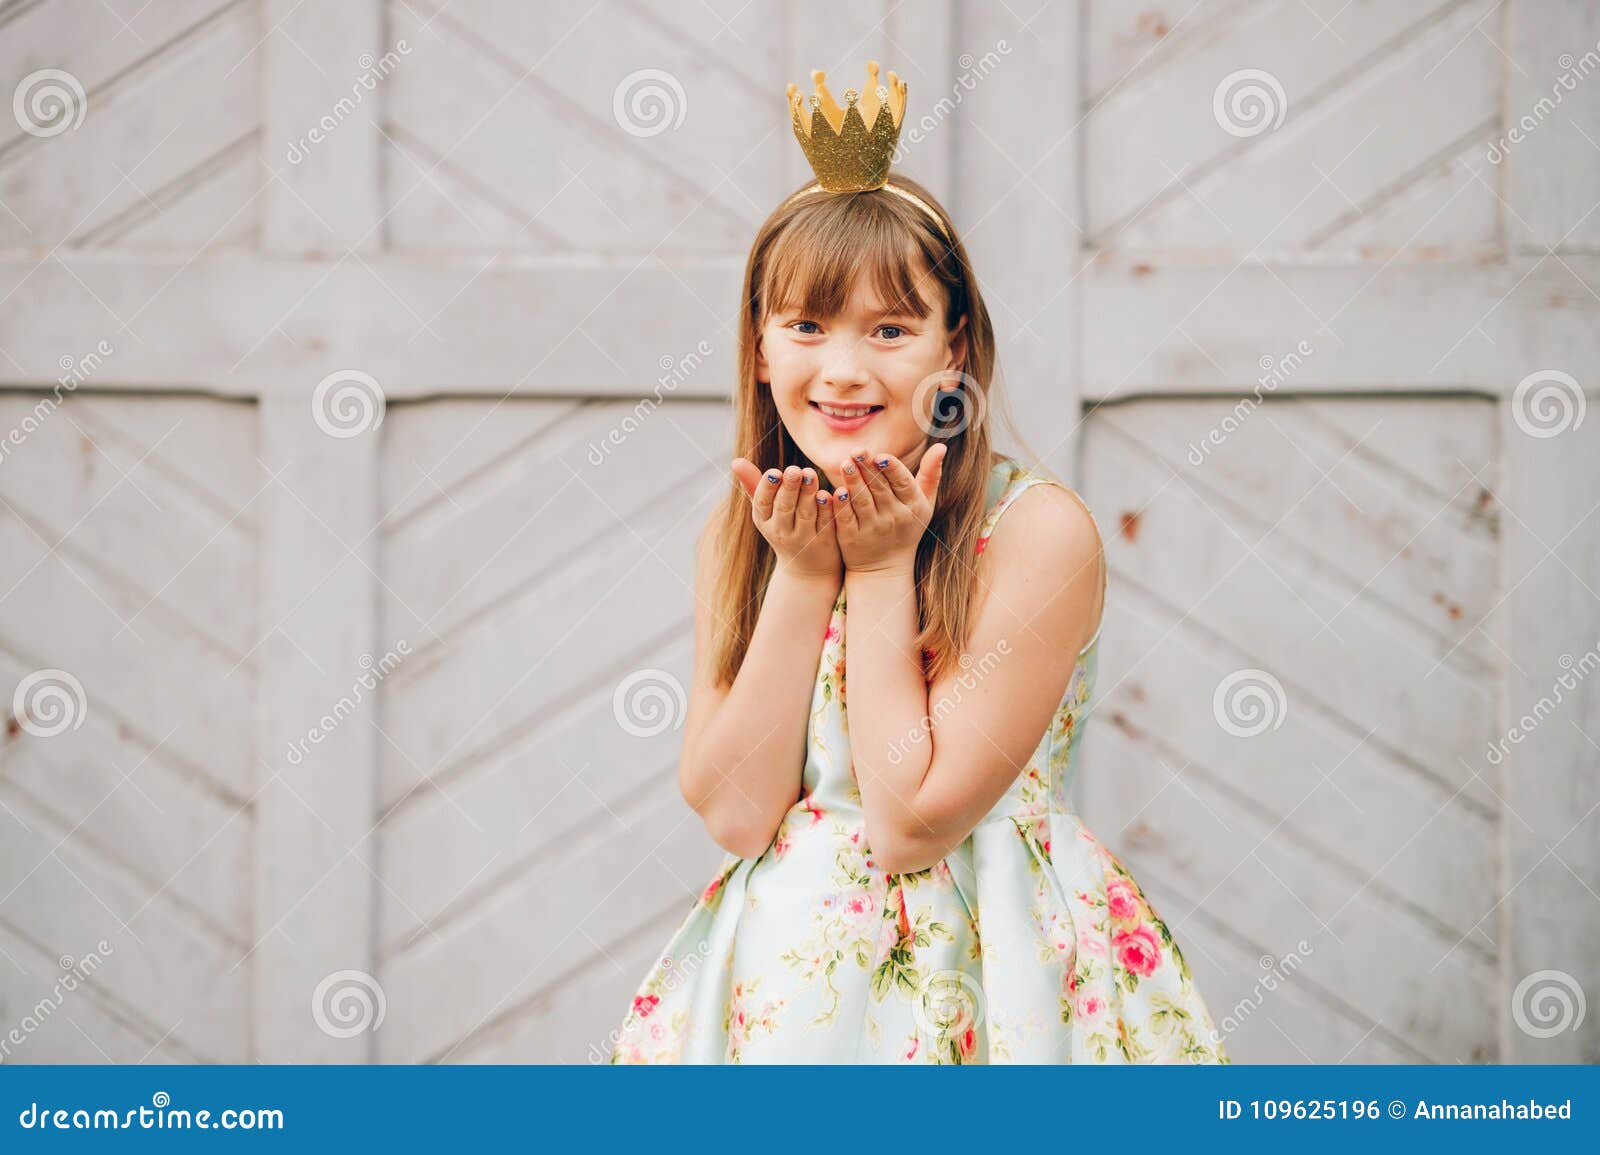 Outdoor Fashion Portrait of Funny 9-10 Year Old Girl Stock Photo ...